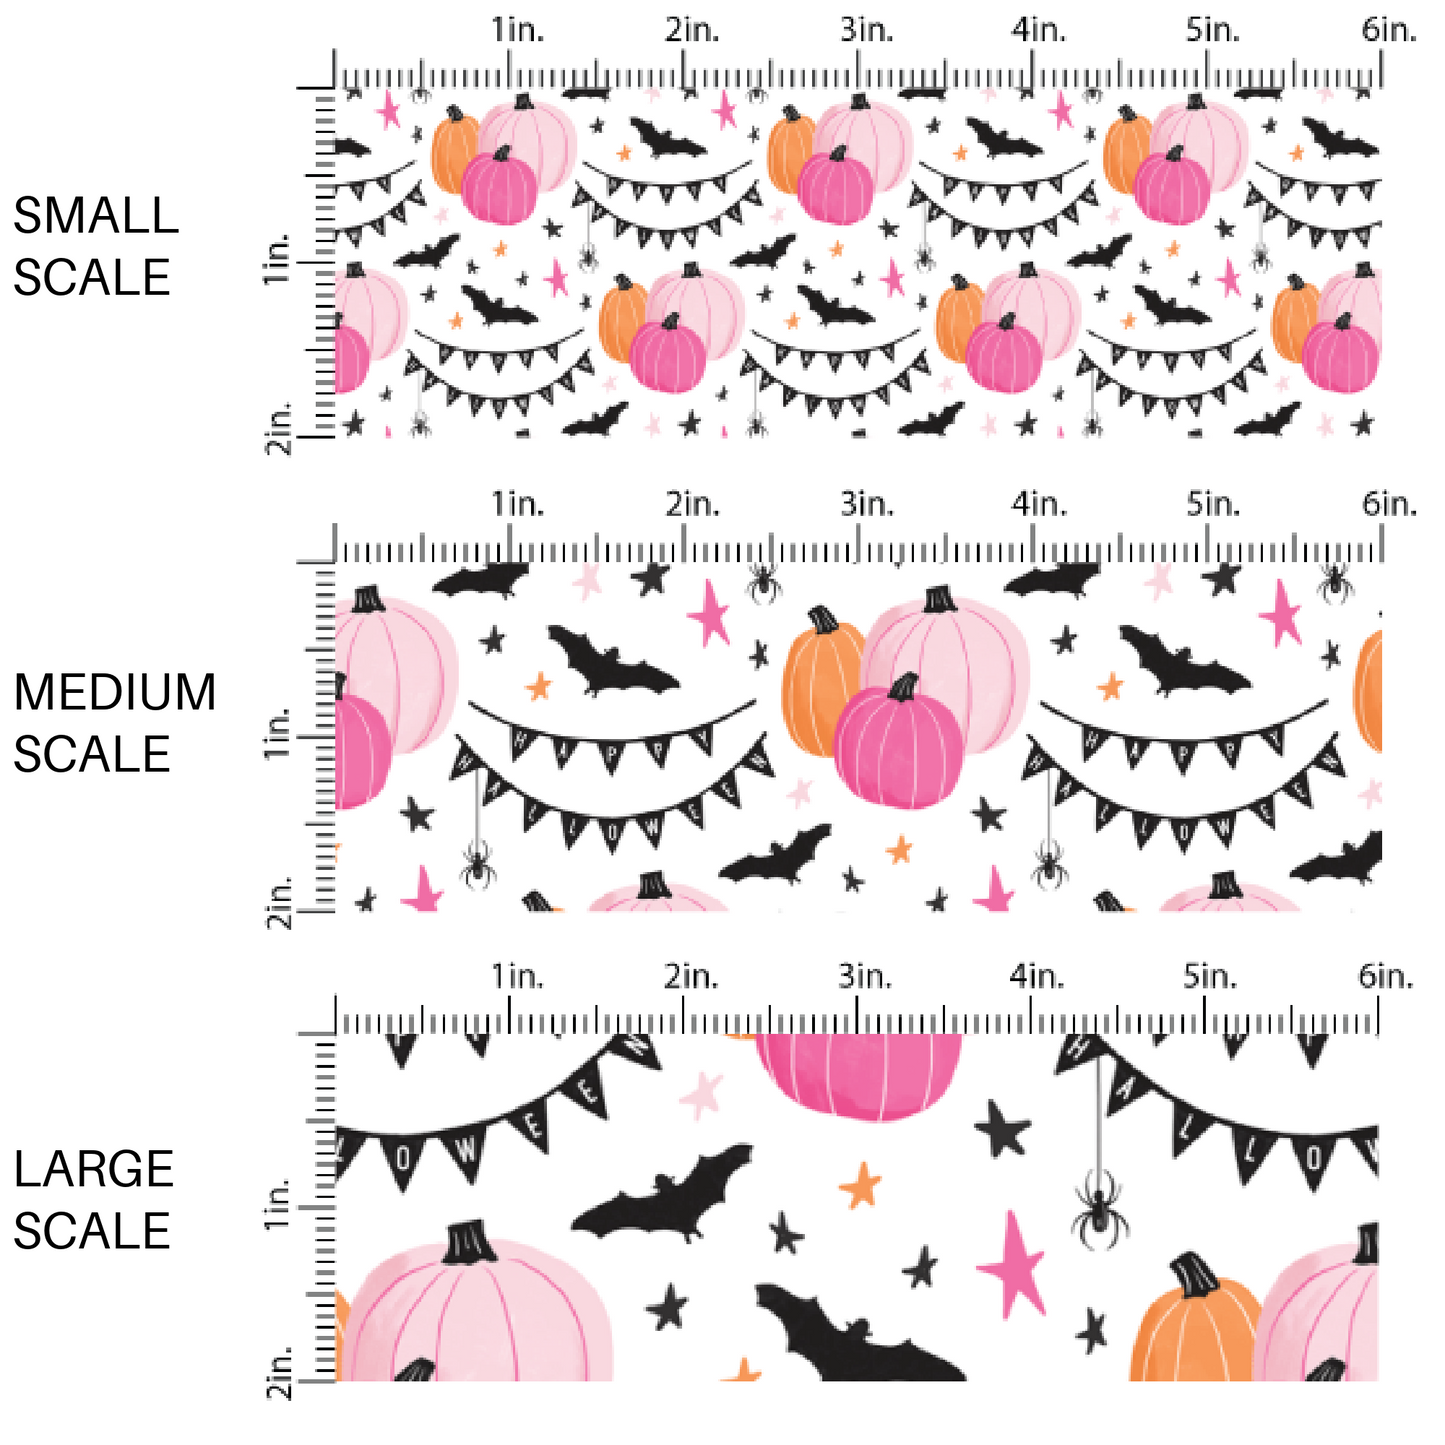 Pink and orange pumpkins, black bats, and Halloween party decorations on white fabric by the yard scaled image guide.